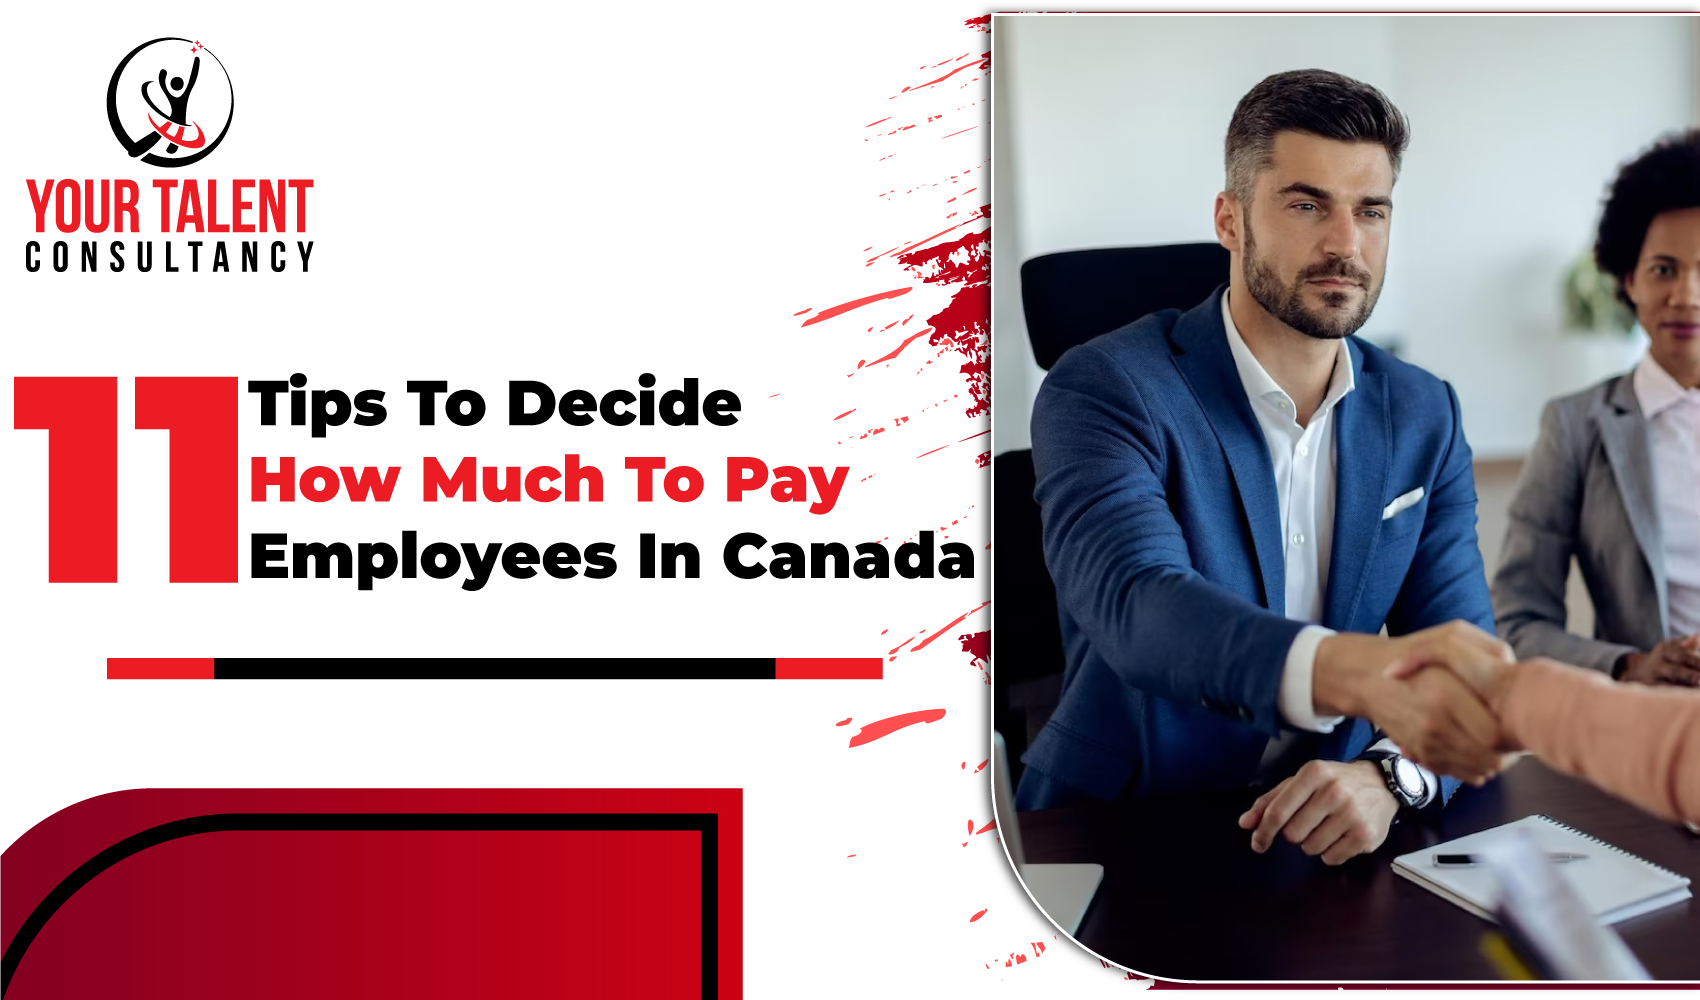 tips for how much to pay employees in canada